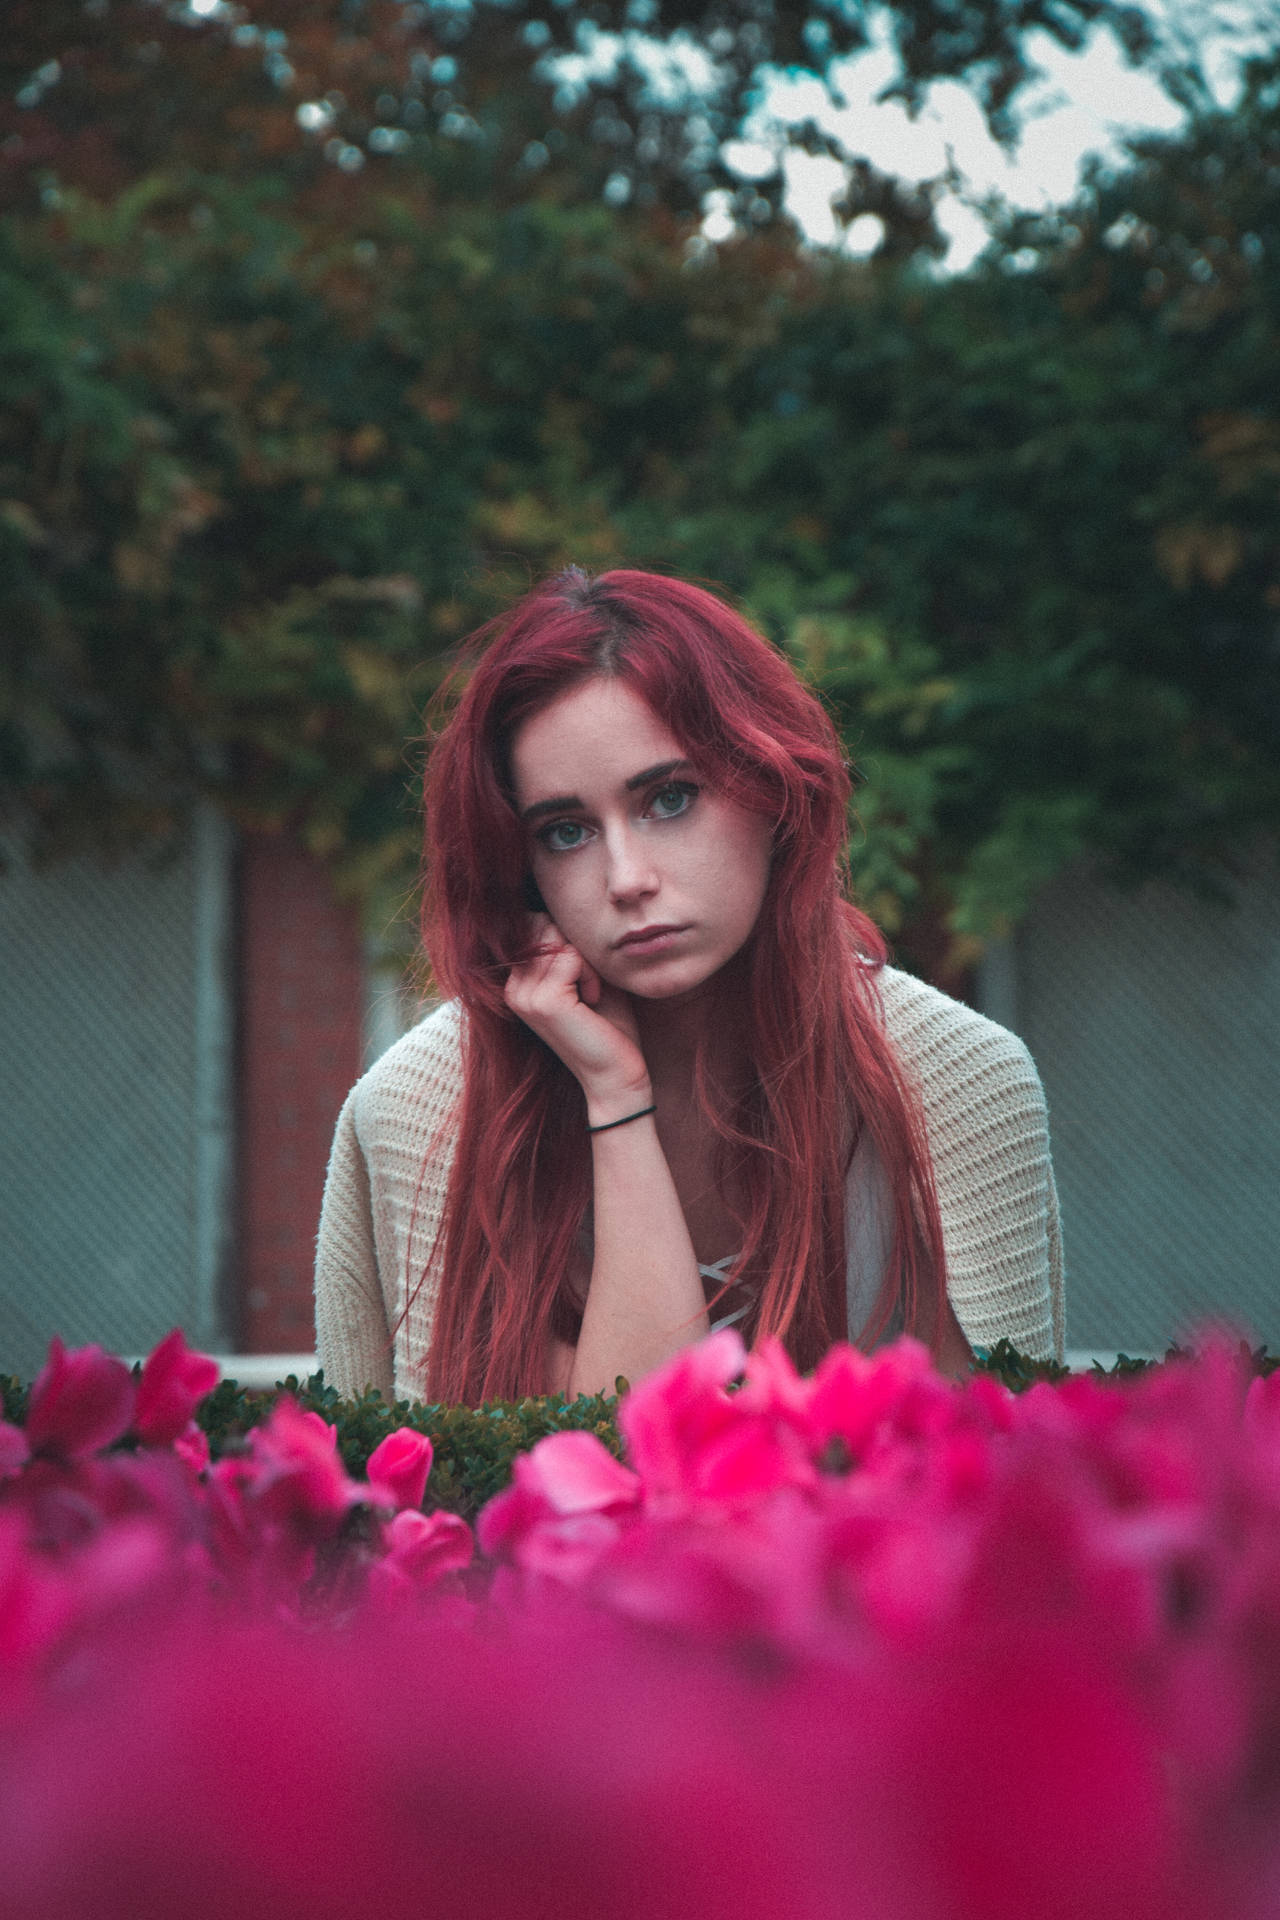 Cool Sad Girl With Flowers Wallpaper